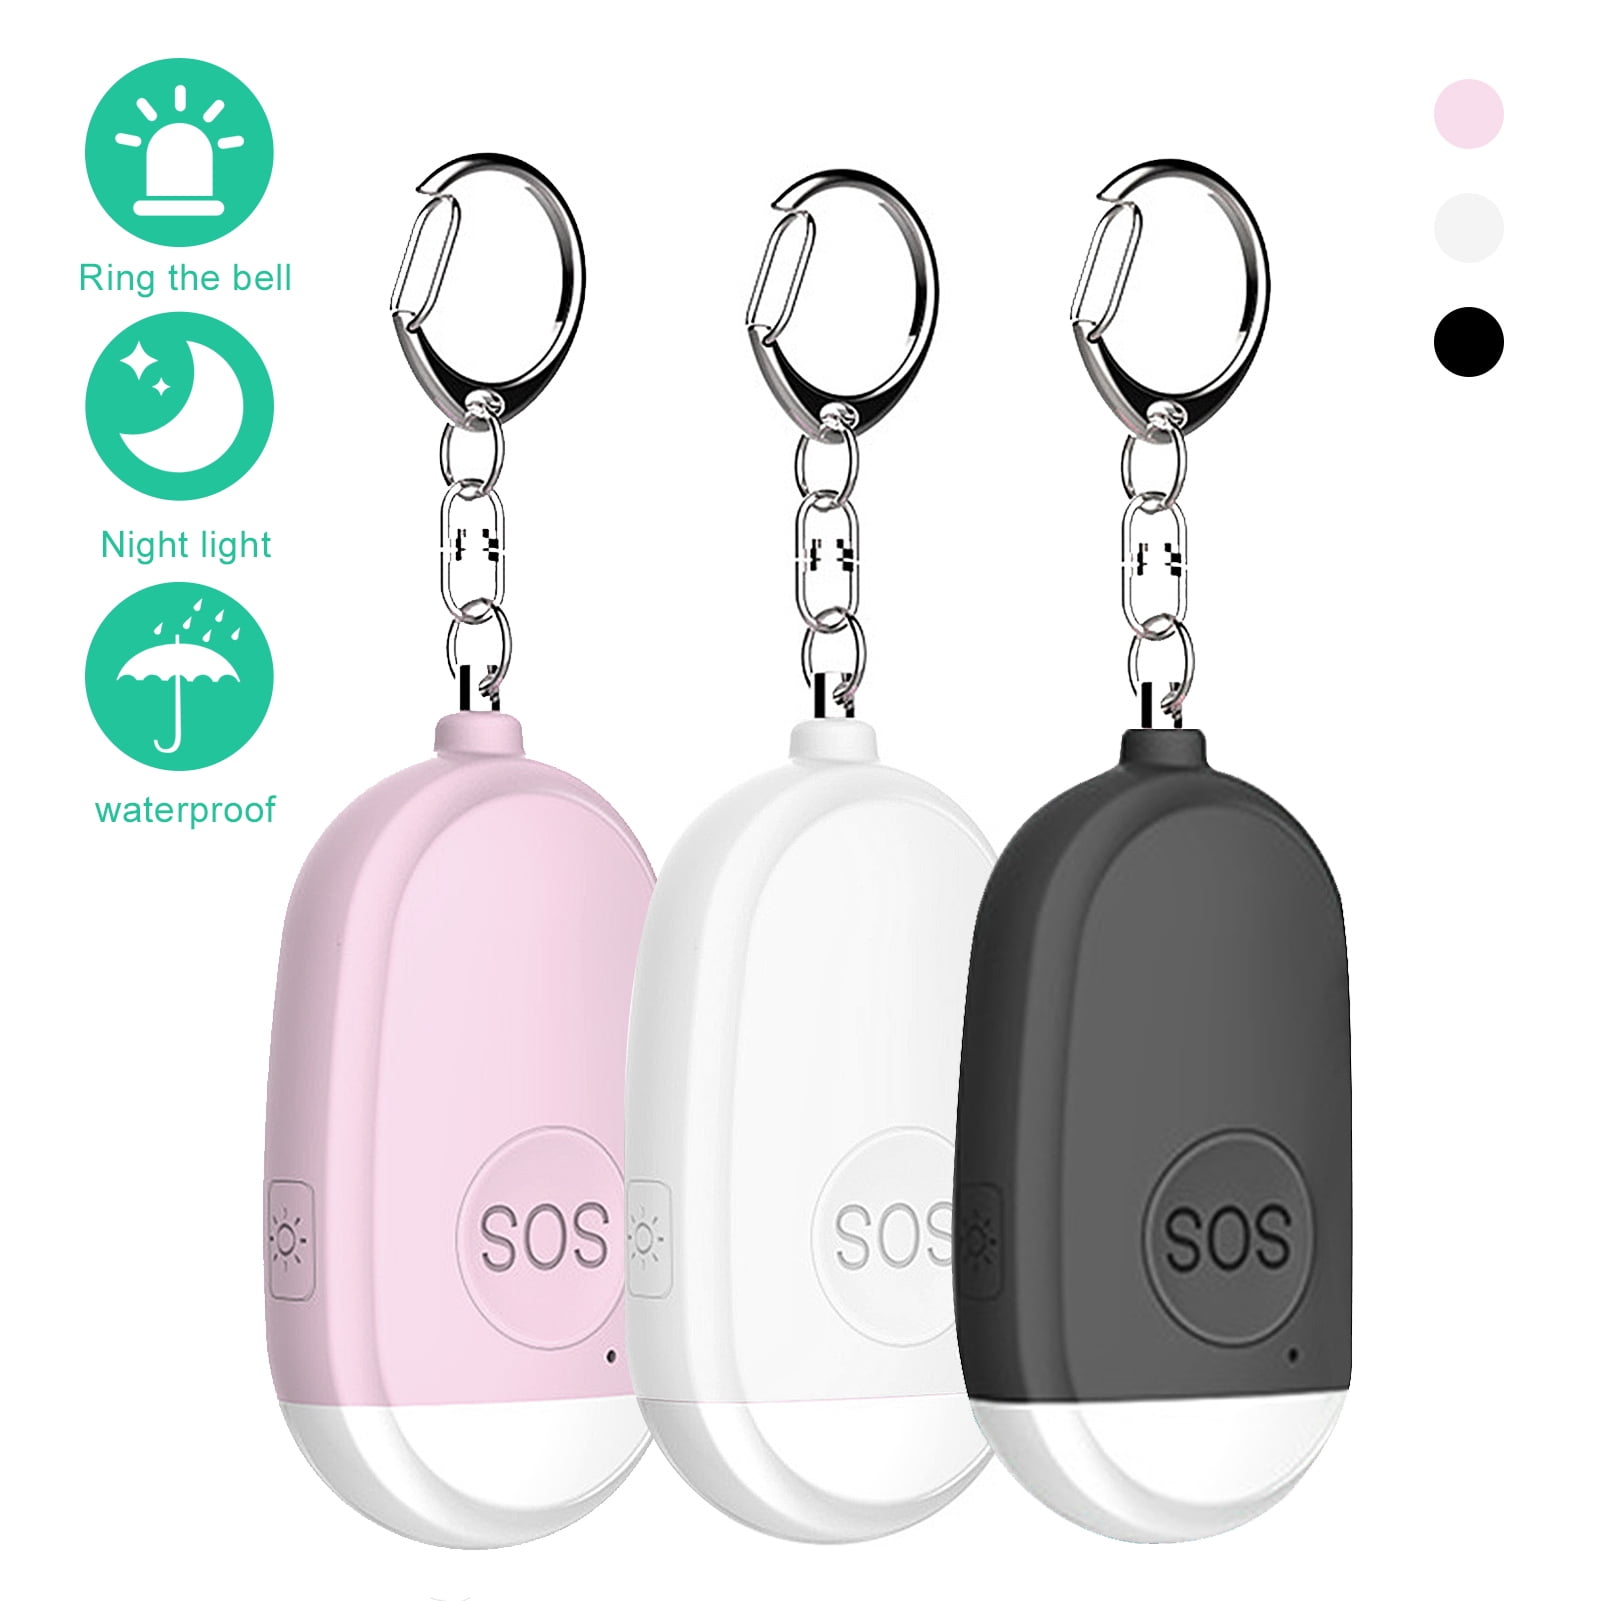 Black OUNONA Emergency Alarms Round Electronic Personal Safety Loud Panic Security Keychain Alarm Anti-Attack Sensors